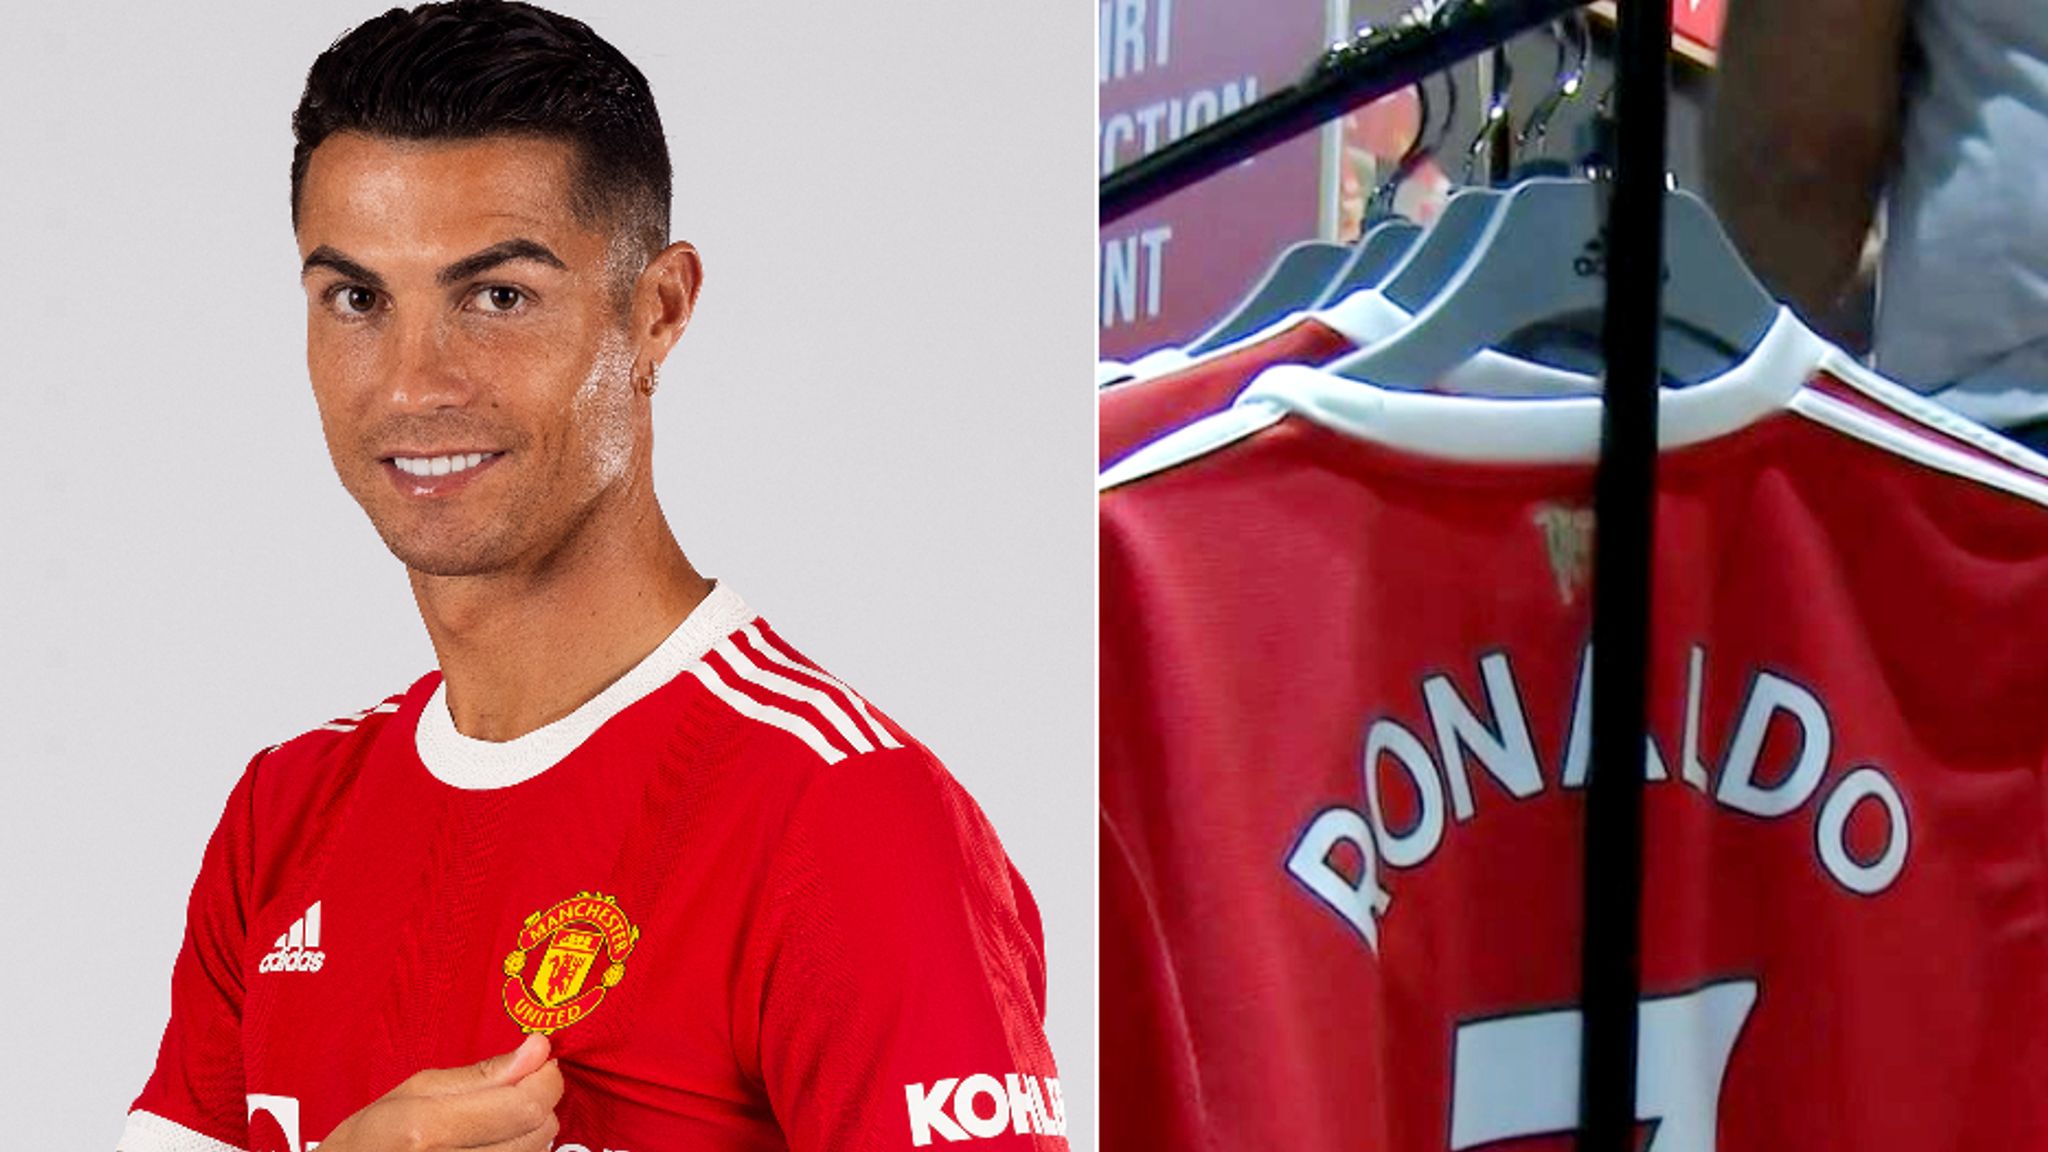 cr7 old manchester united jersey